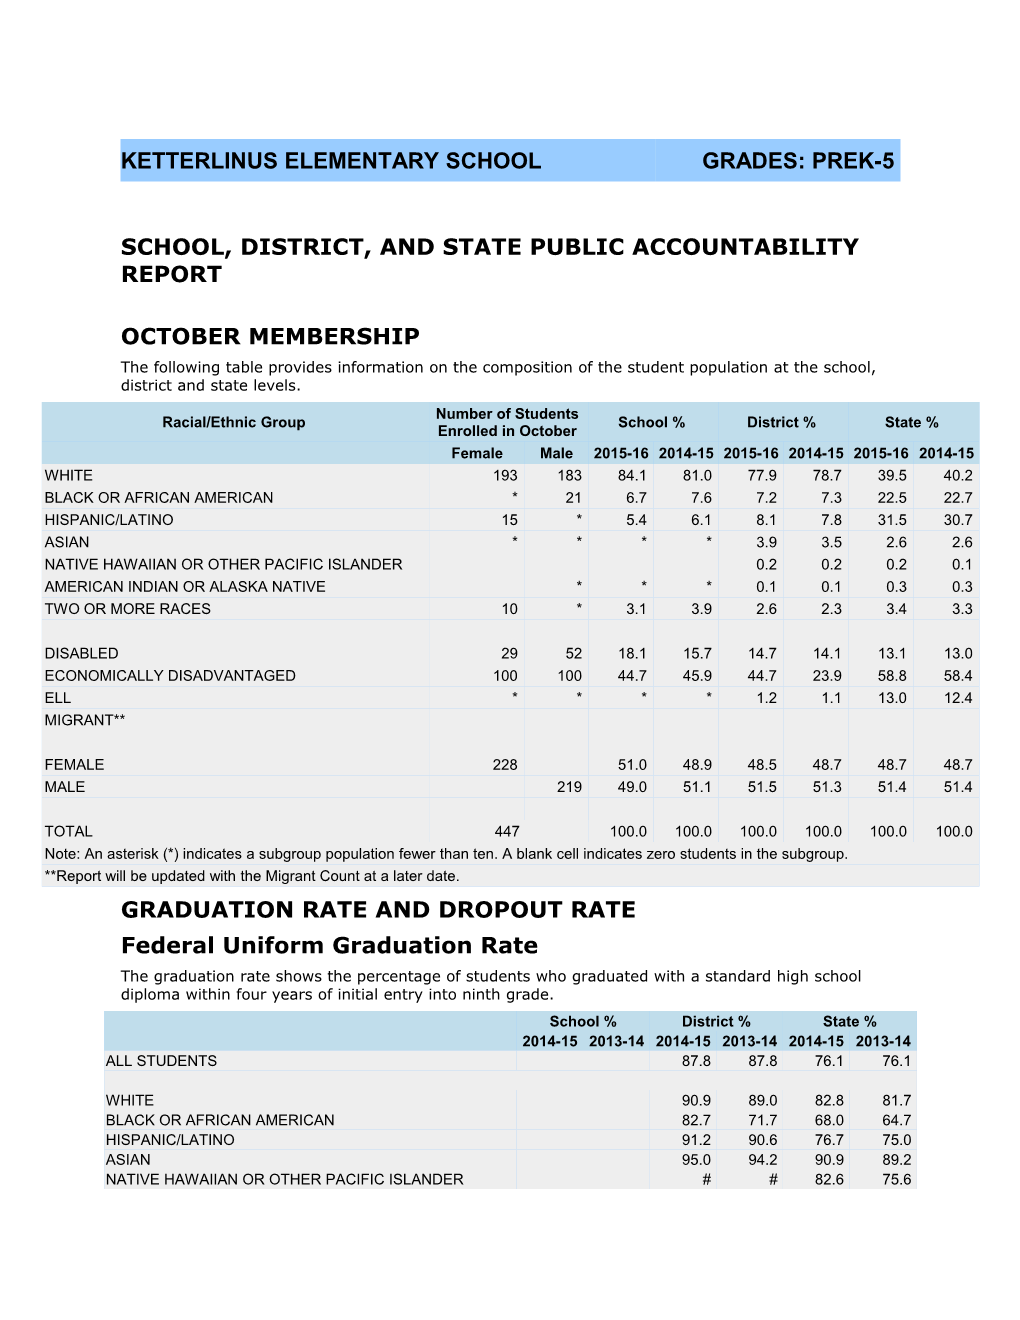 School, District, and State Public Accountability Report